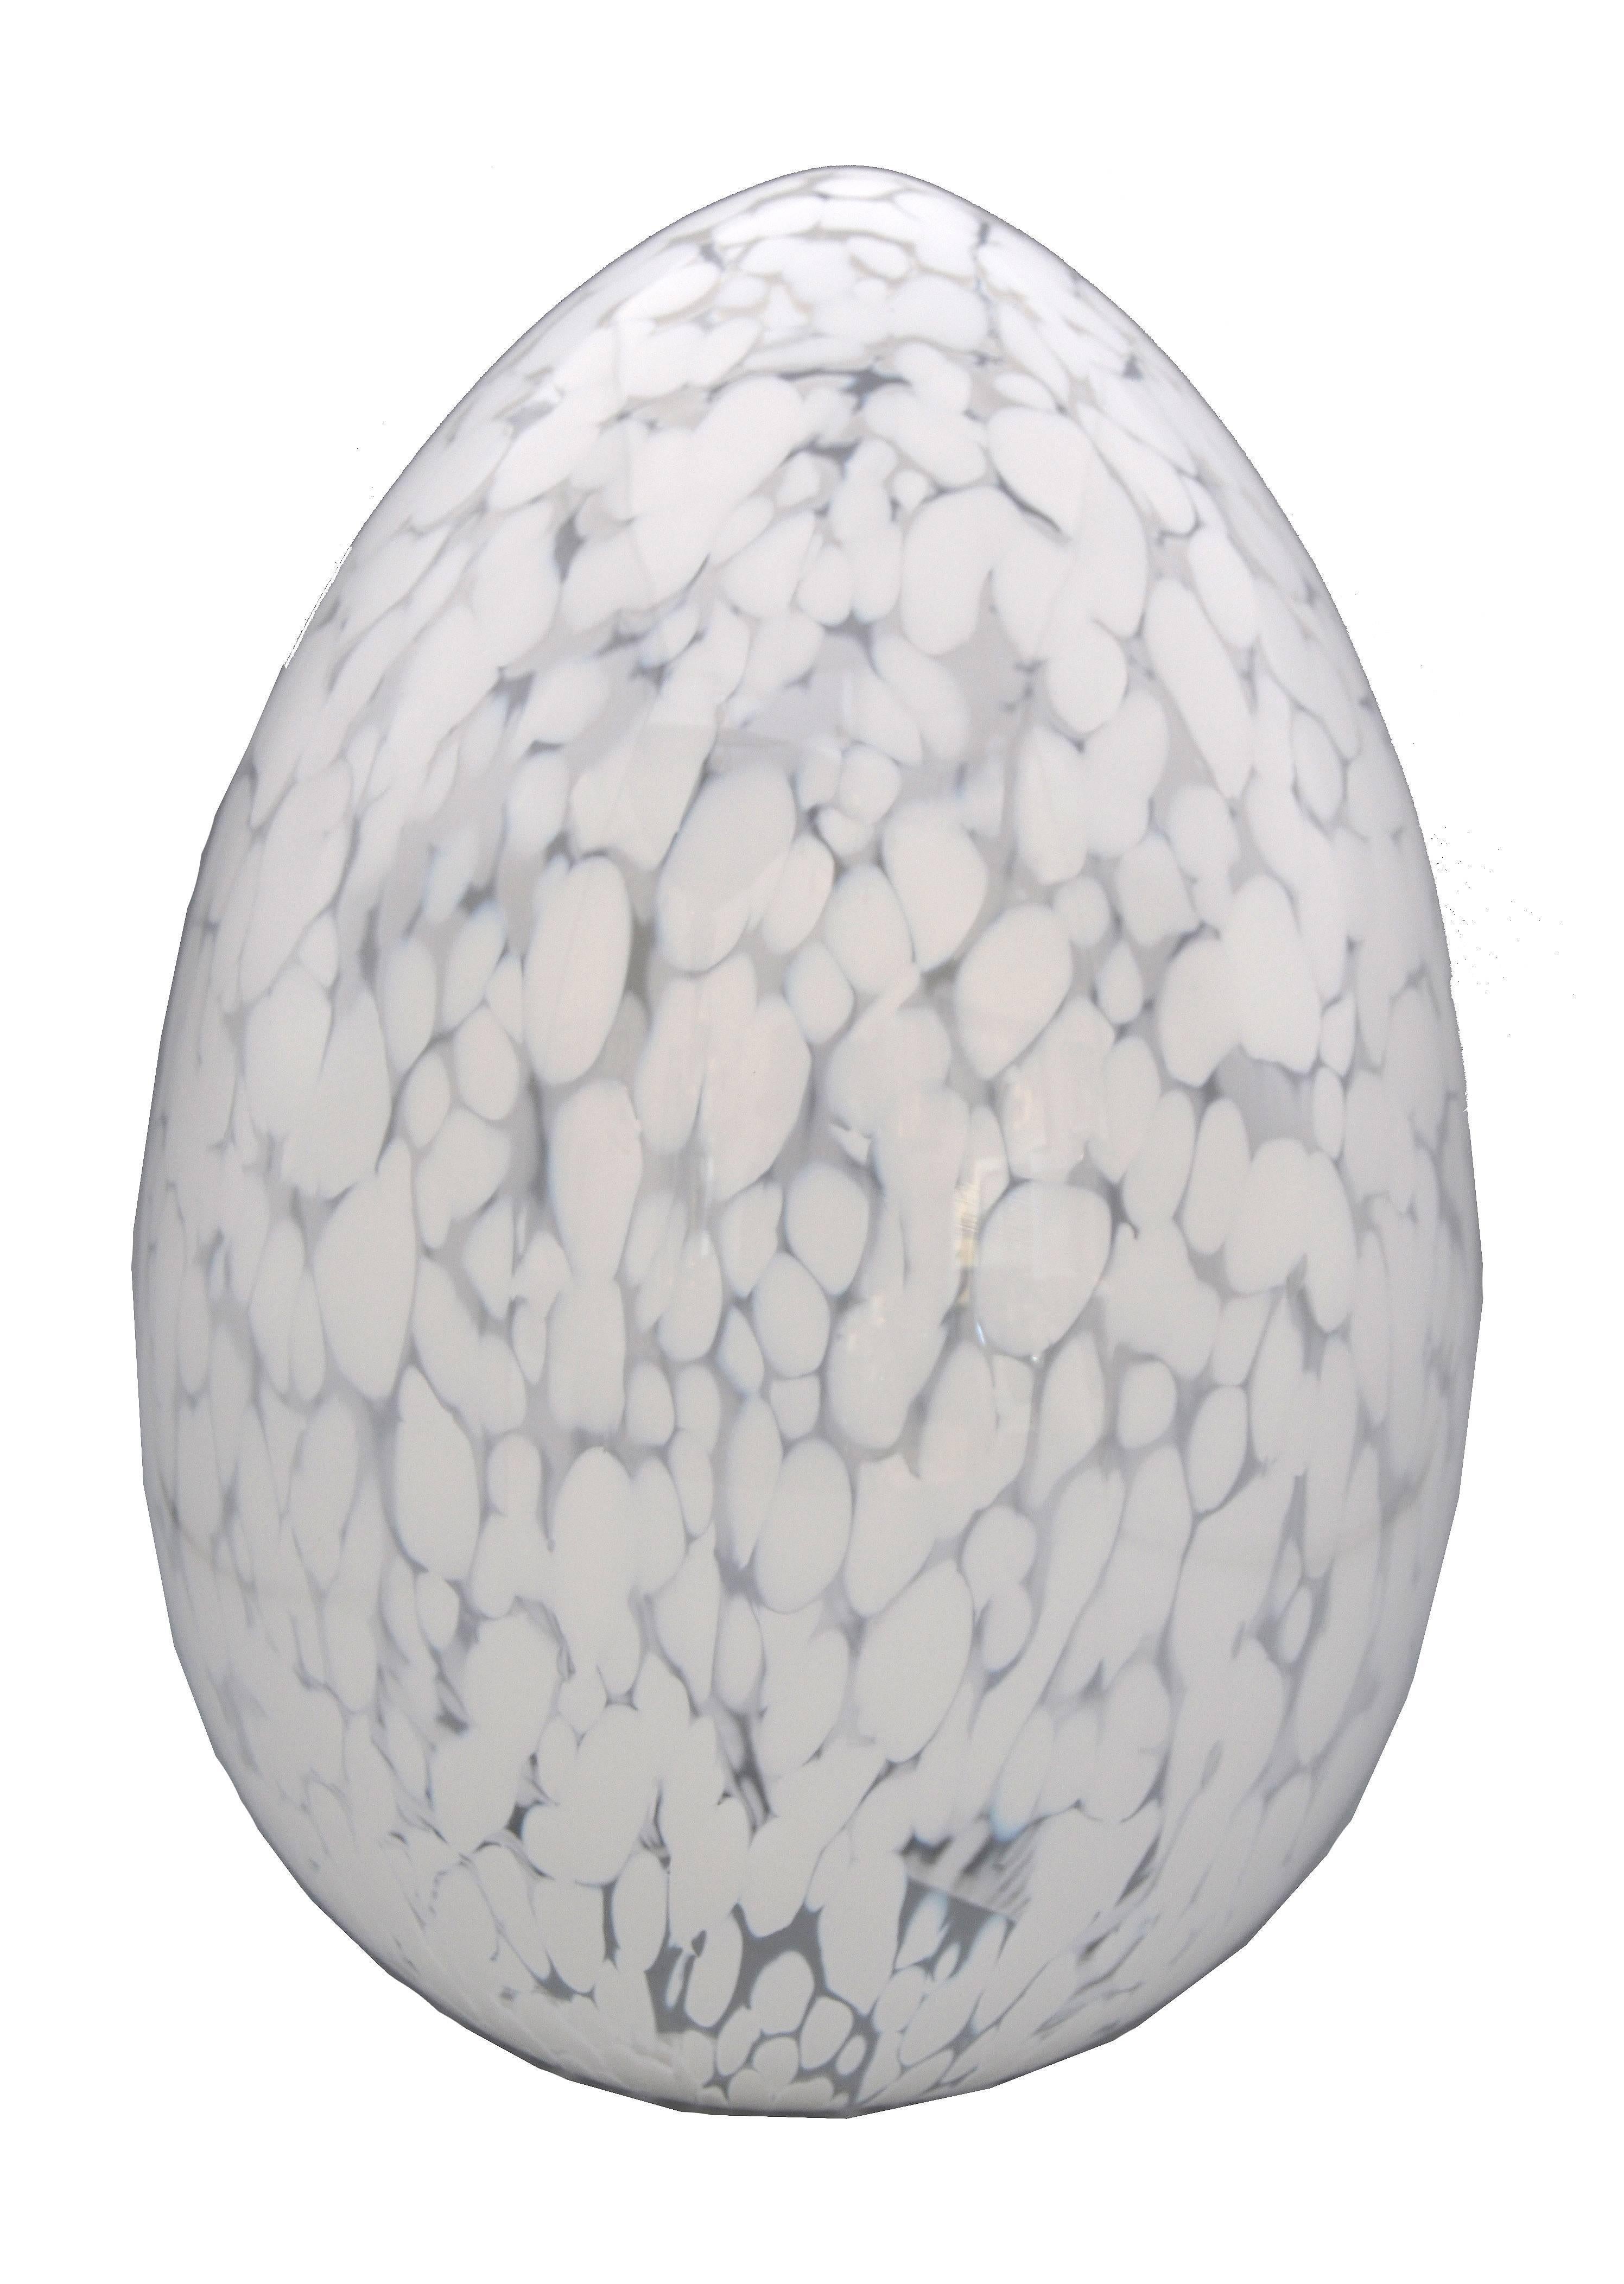 Large hand blown Murano art glass egg sculpture.
Made in Italy.